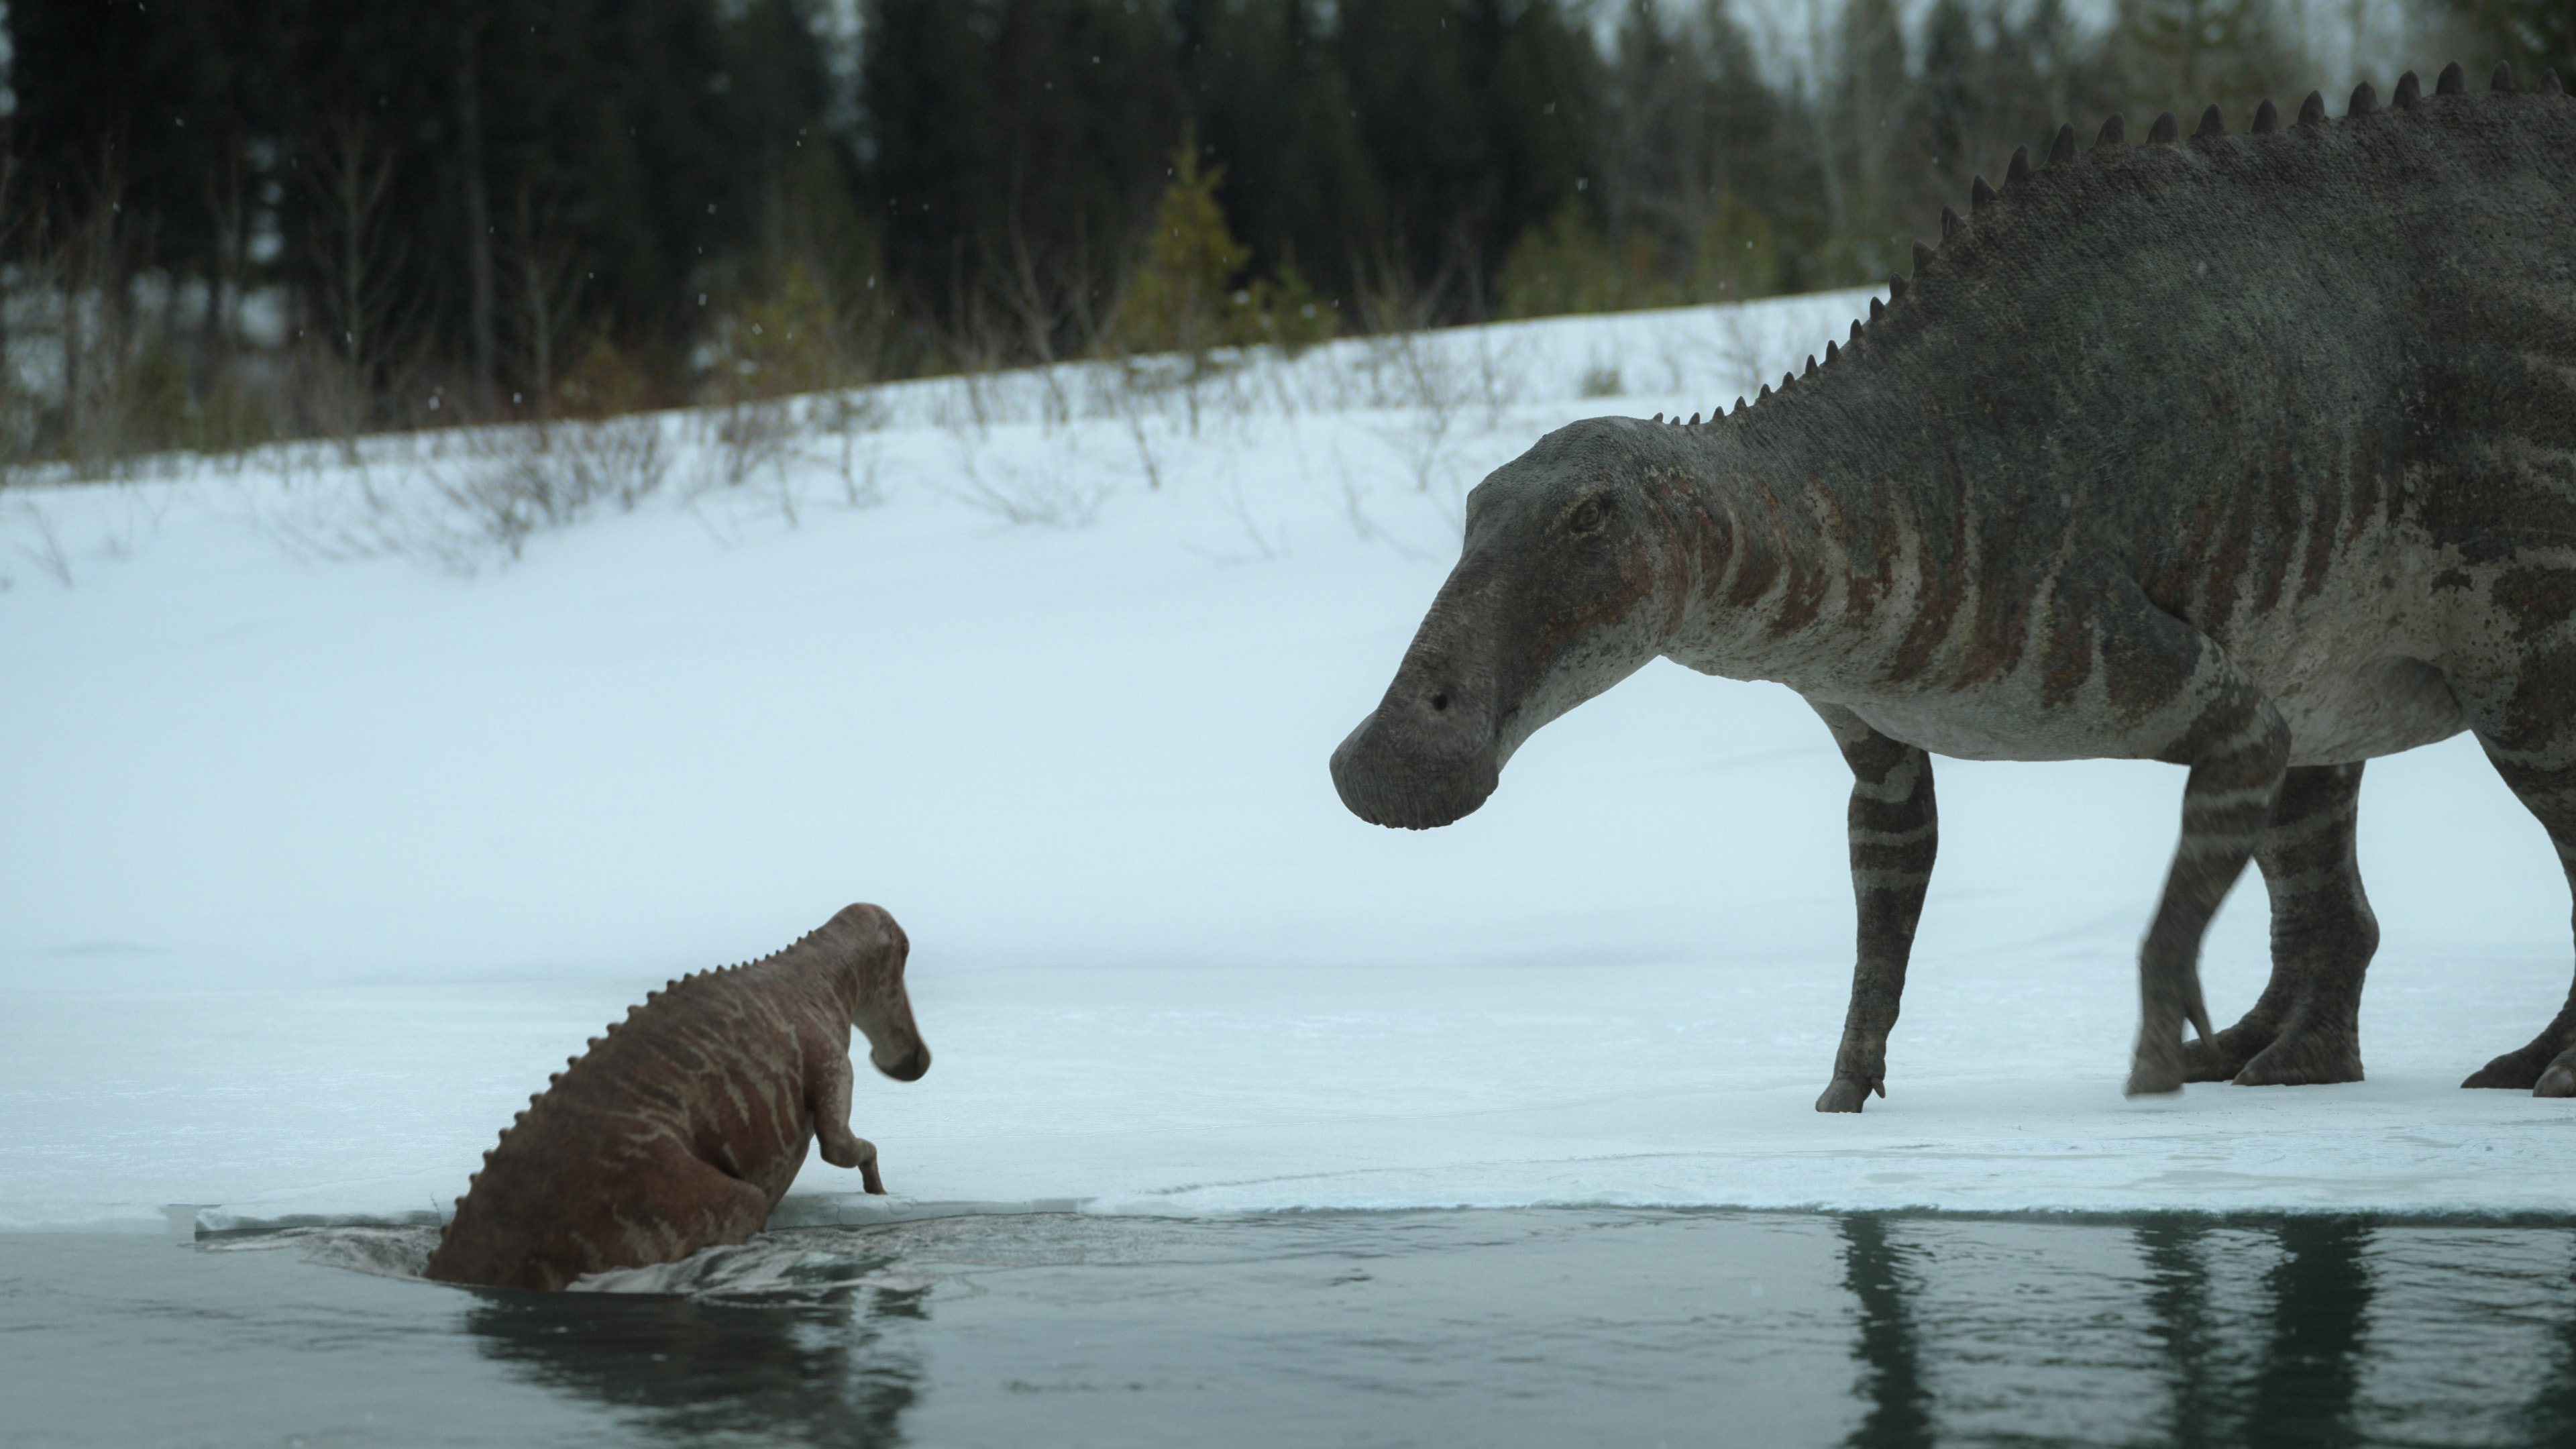 A baby Edmontosaurus climbing out of the water next to an adult Edmontosaurus from